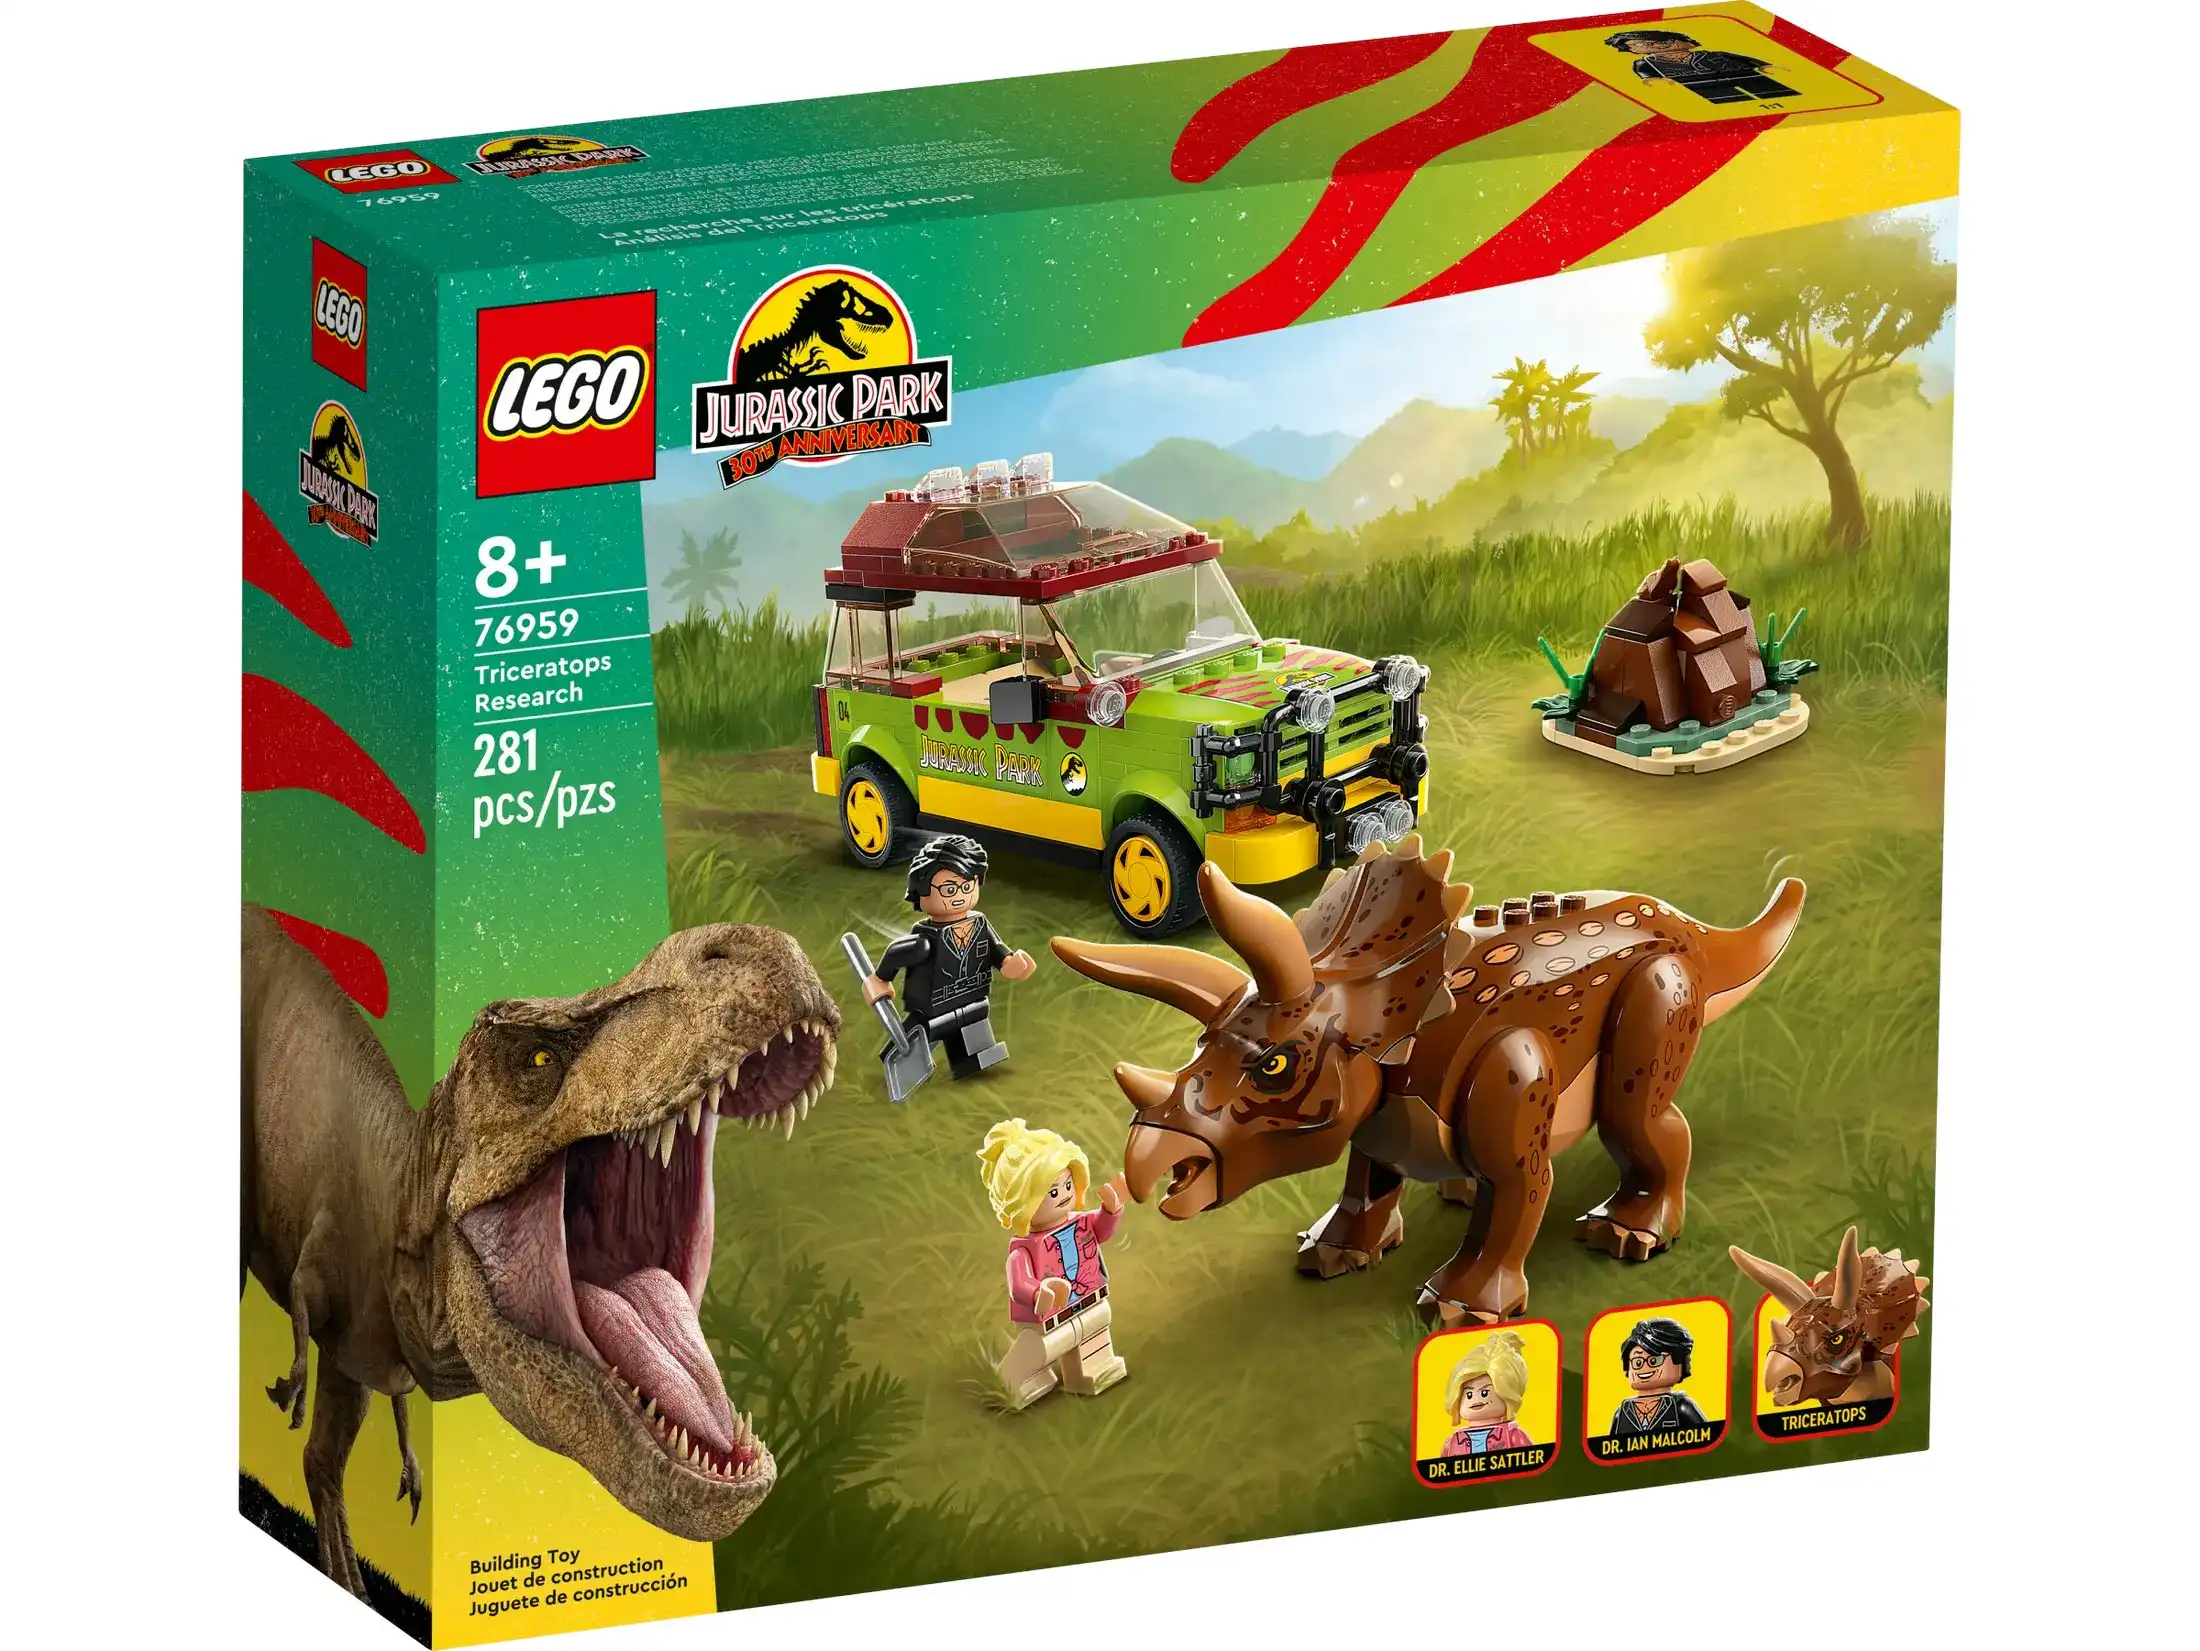 LEGO 76959 Triceratops Research - Jurassic World